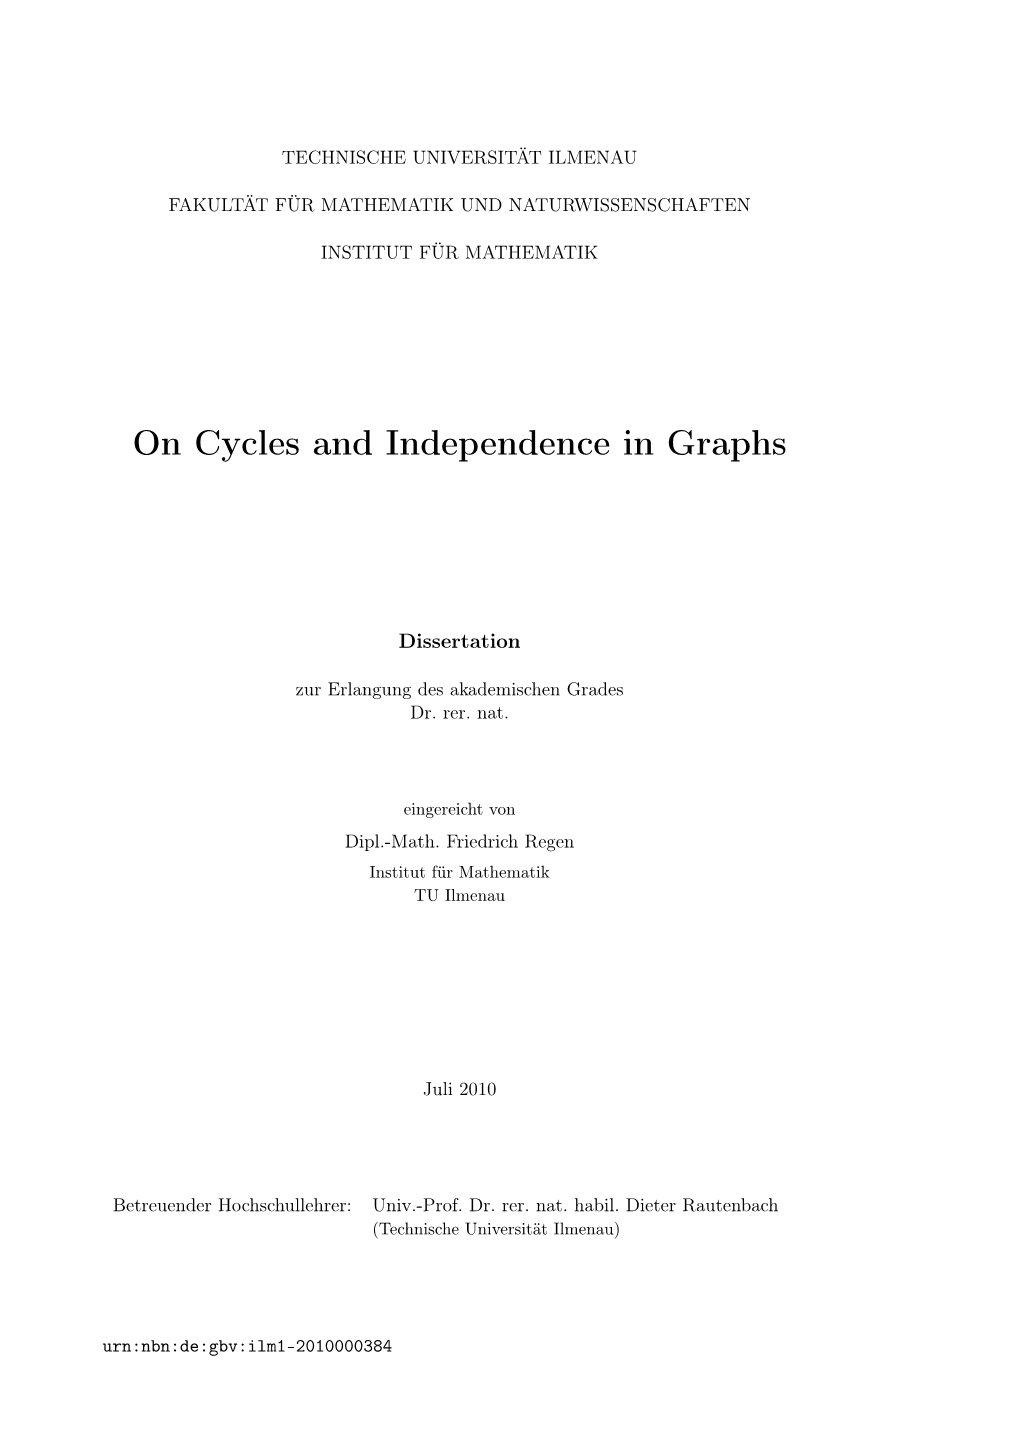 On Cycles and Independence in Graphs